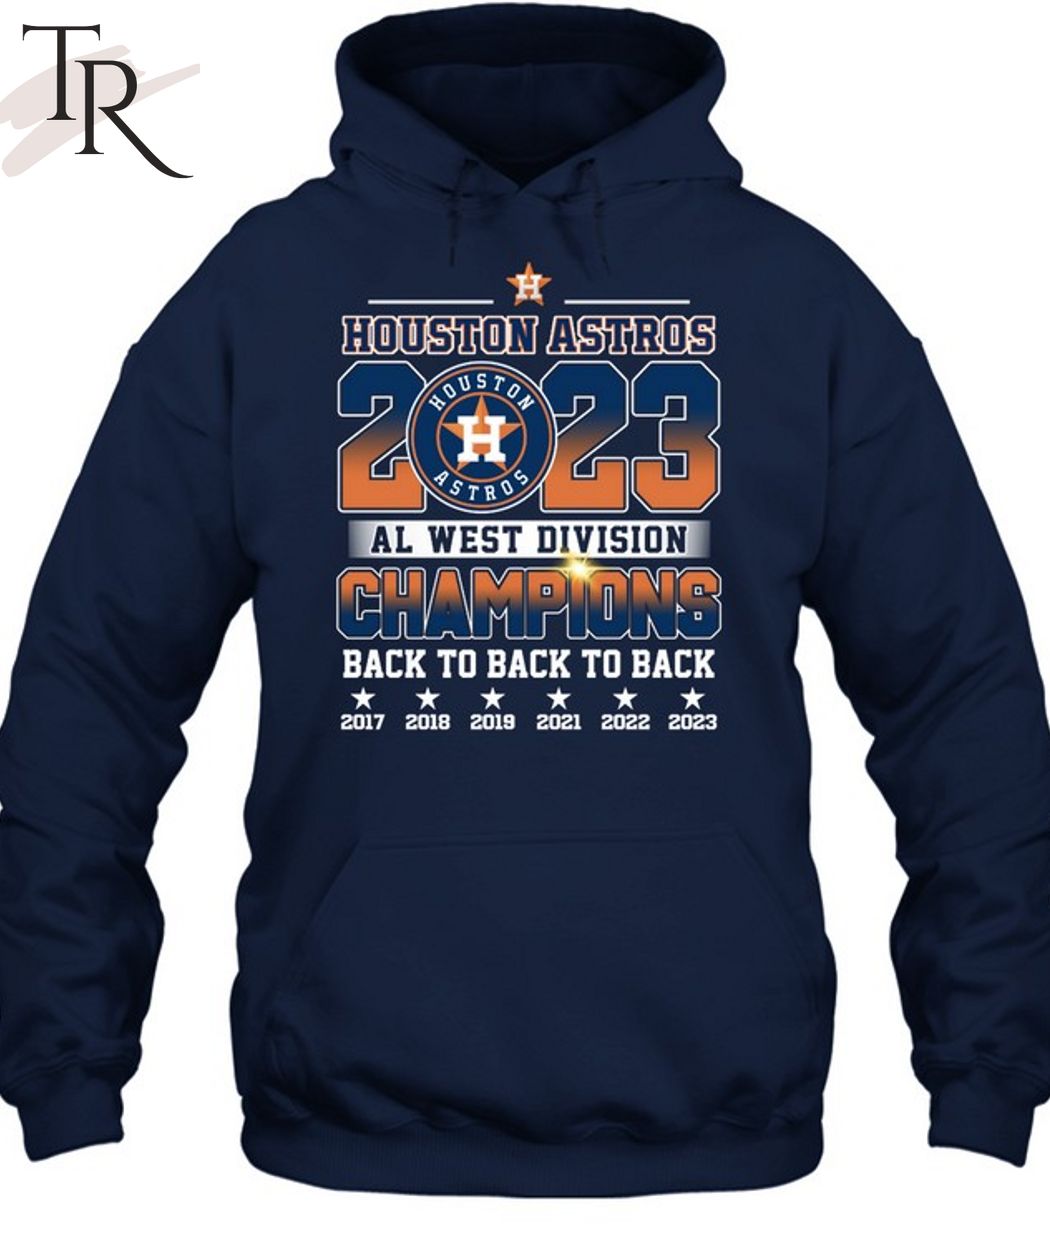 Houston Astros AL West Division Champions Back To Back To Back T-Shirt -  Torunstyle